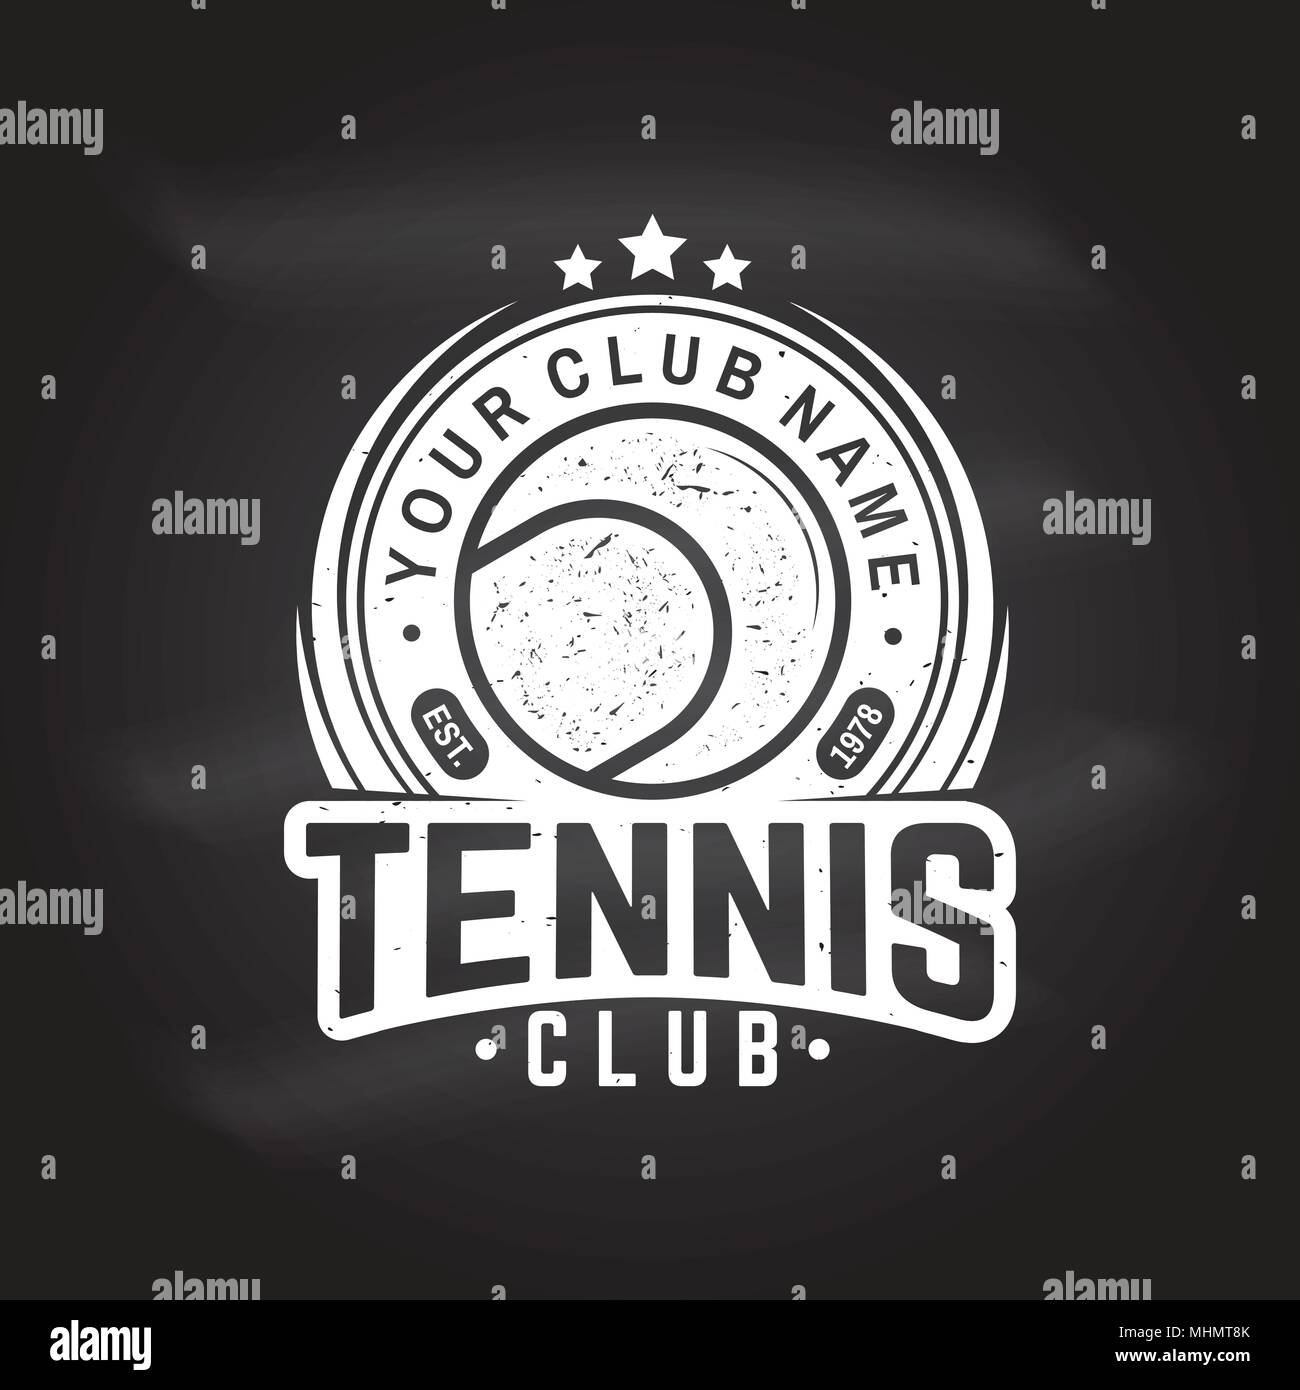 Tennis club club badge on the chalkboard. Vector illustration. Concept for shirt, print, stamp or tee. Vintage typography design with tennis ball silh Stock Vector